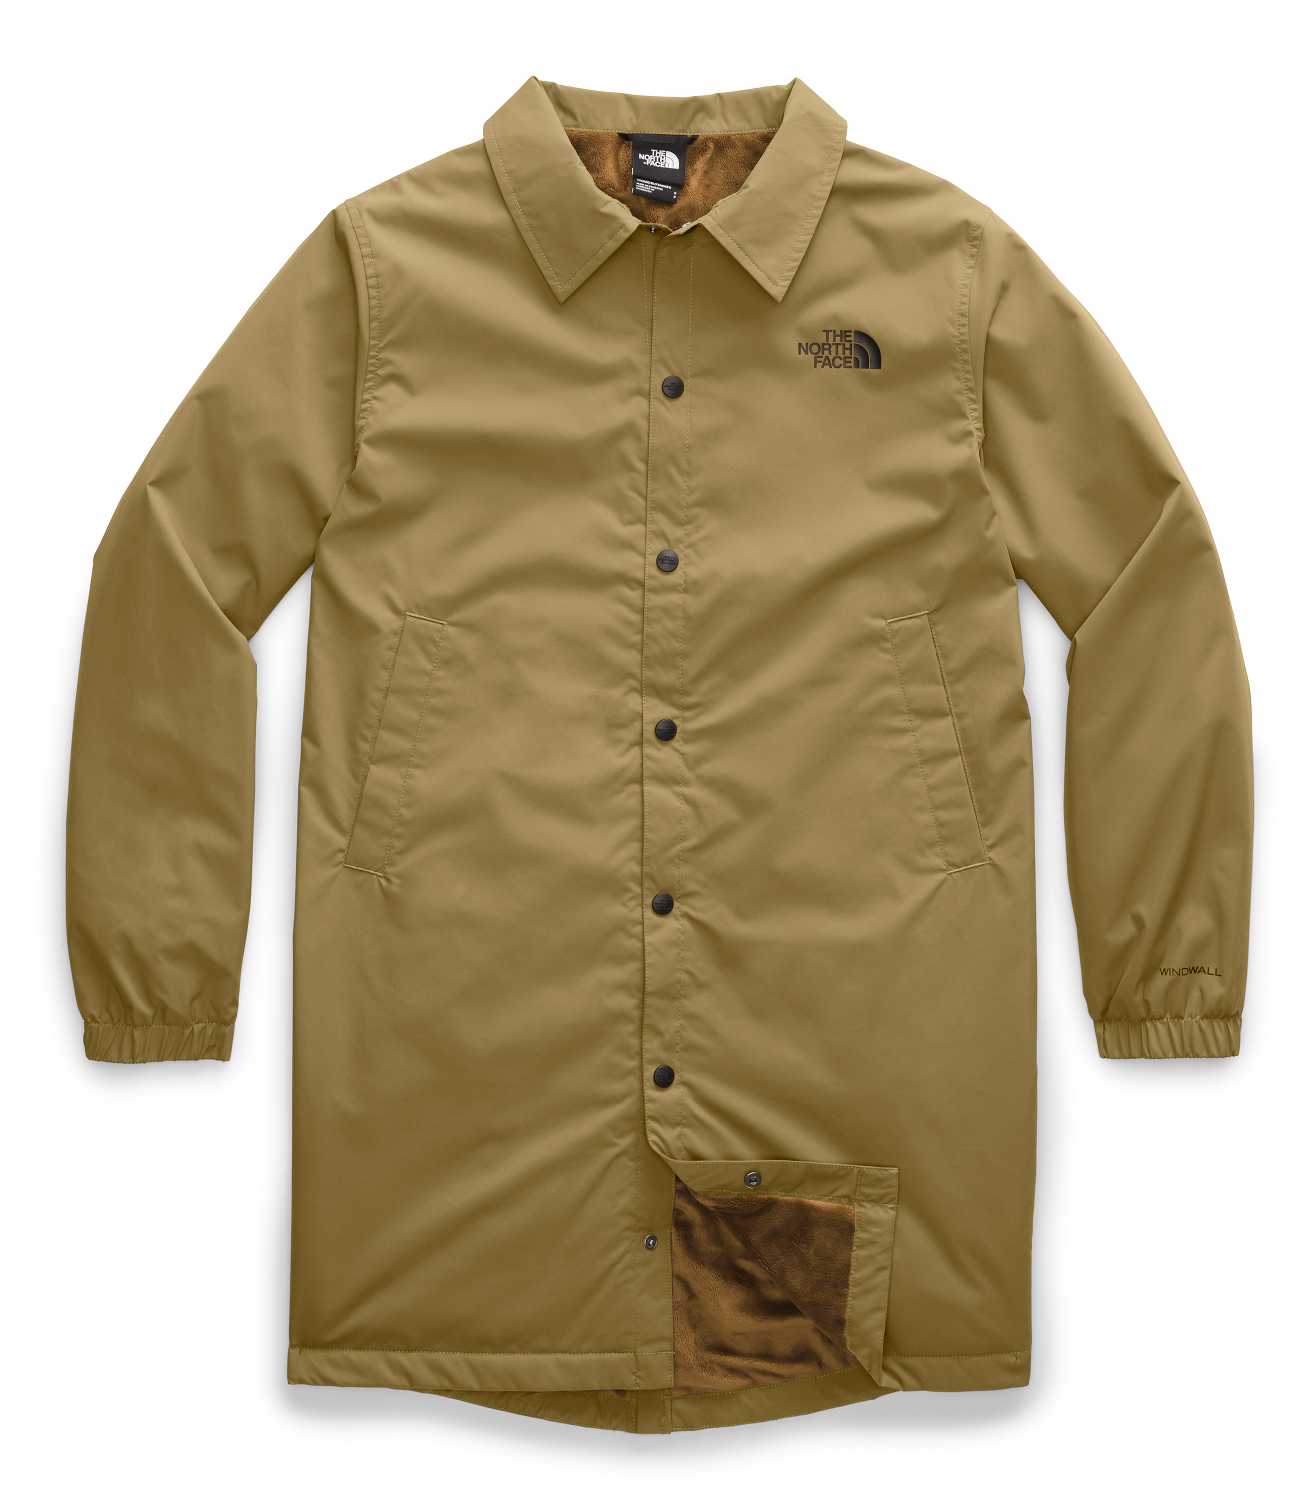 The North Face Renewed - WOMEN'S TELEGRAPHIC COACHES JACKET